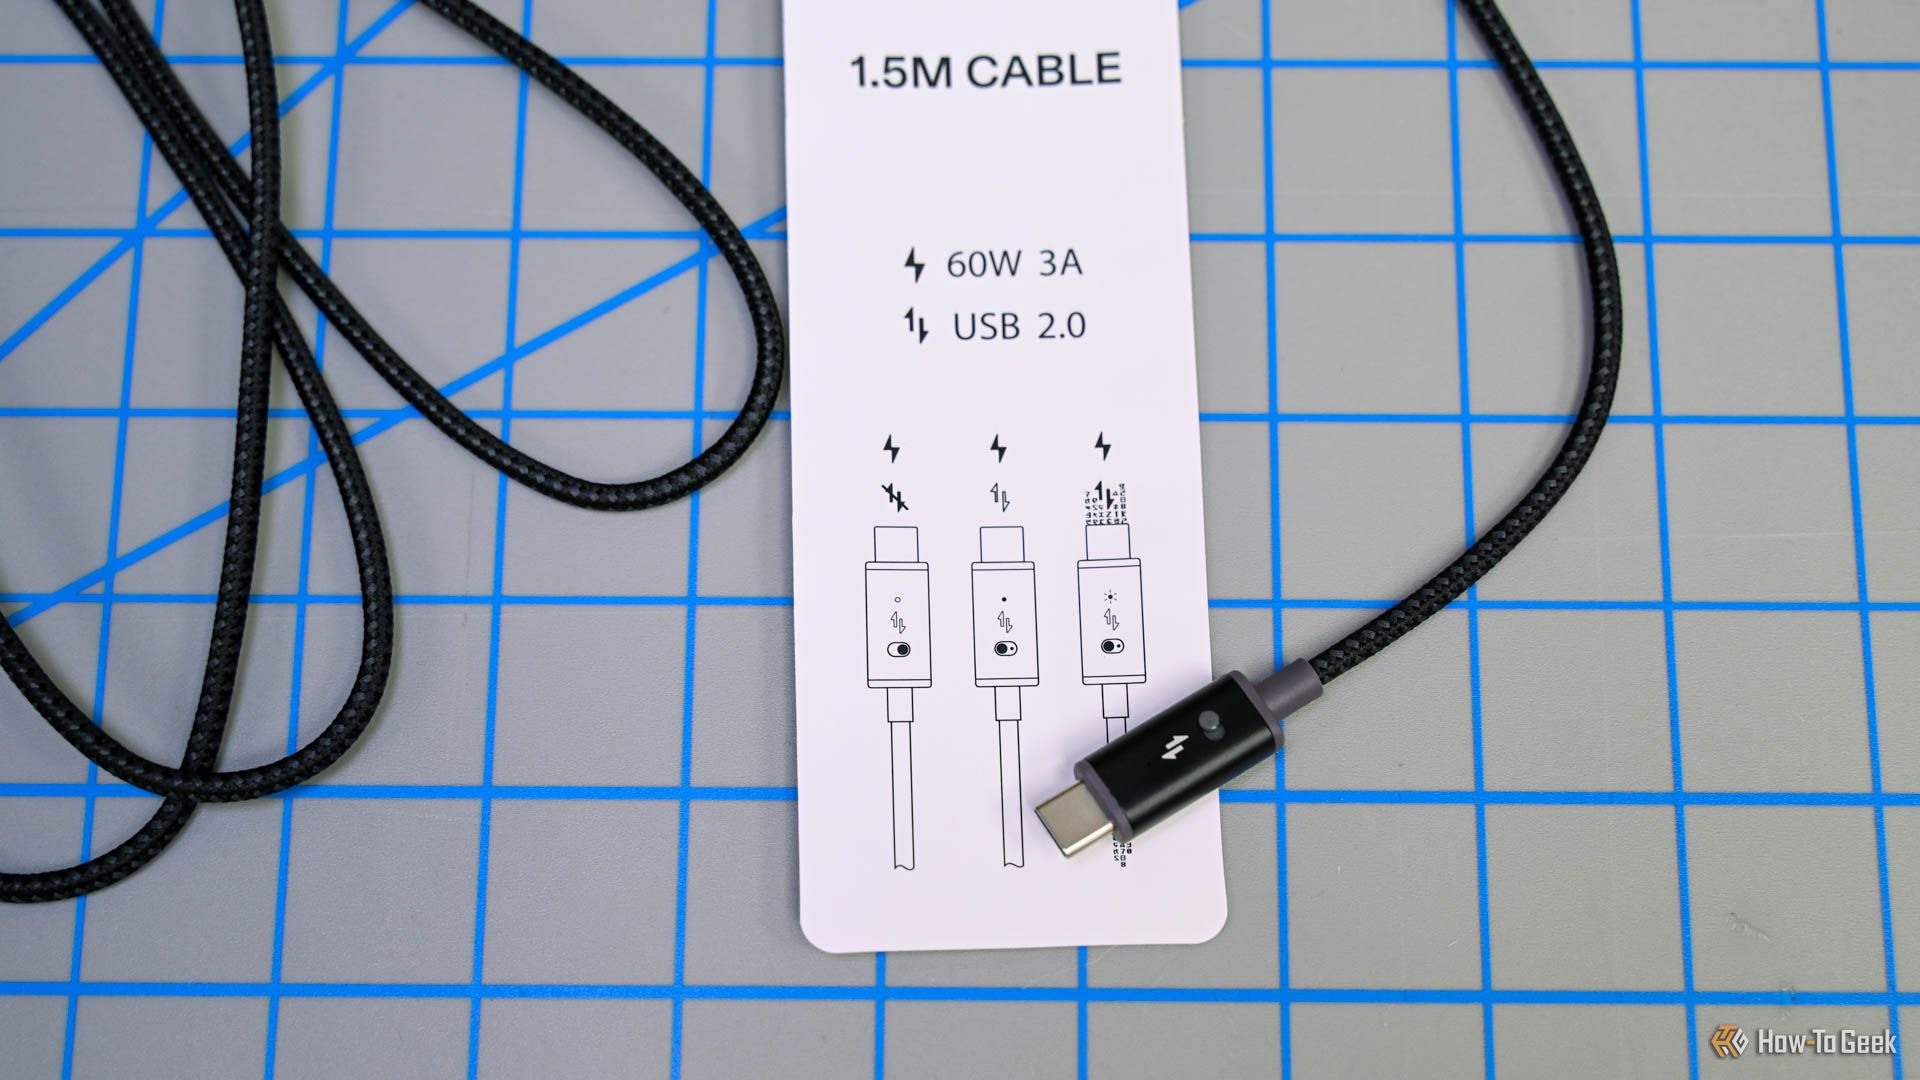 The OSOM Privacy Cable with the paper explaining the modes